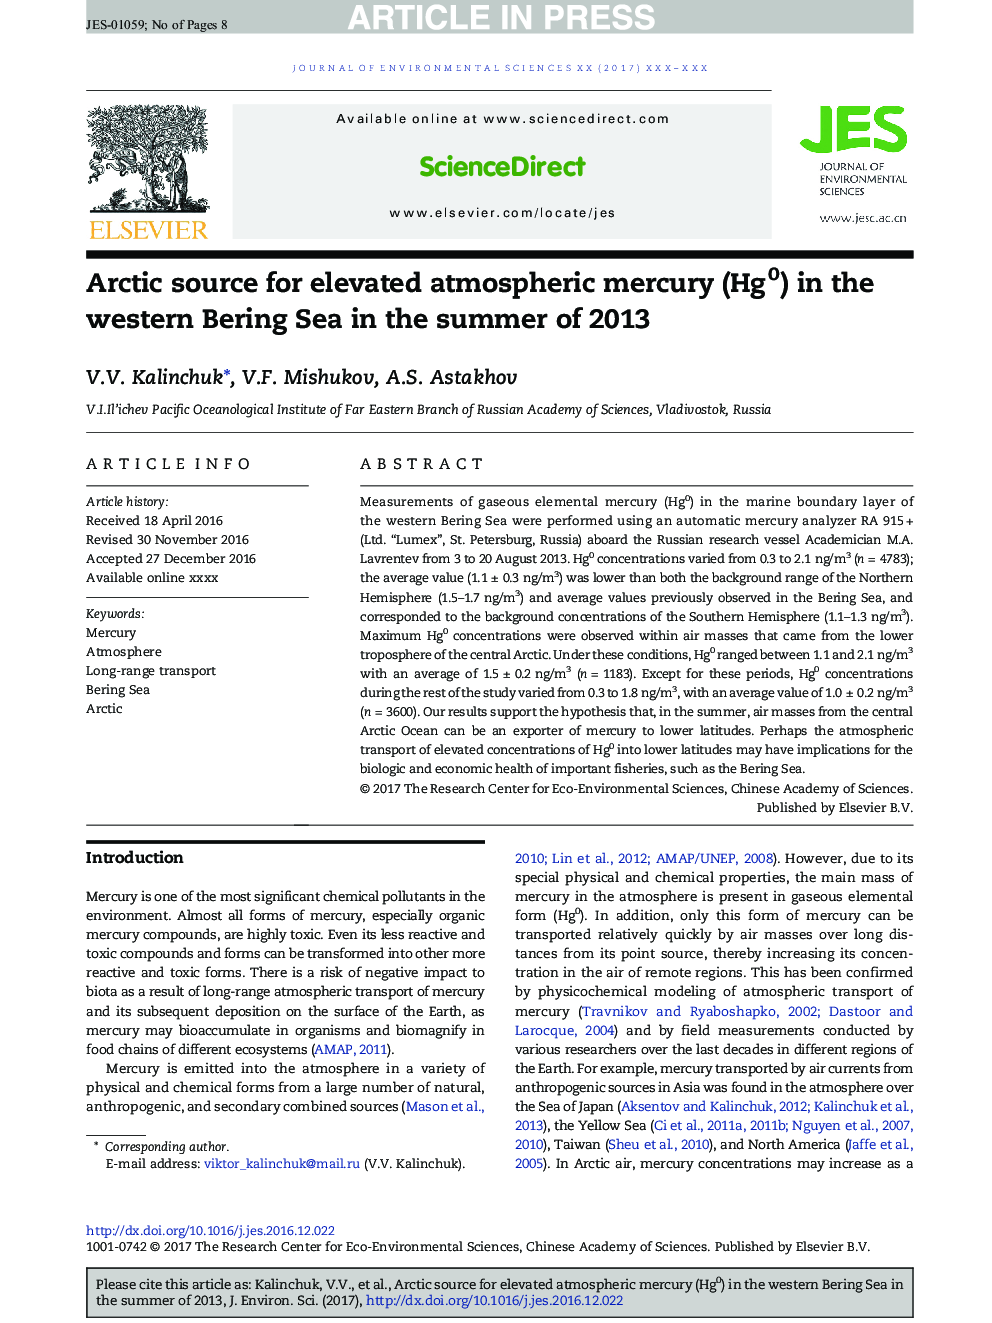 Arctic source for elevated atmospheric mercury (Hg0) in the western Bering Sea in the summer of 2013